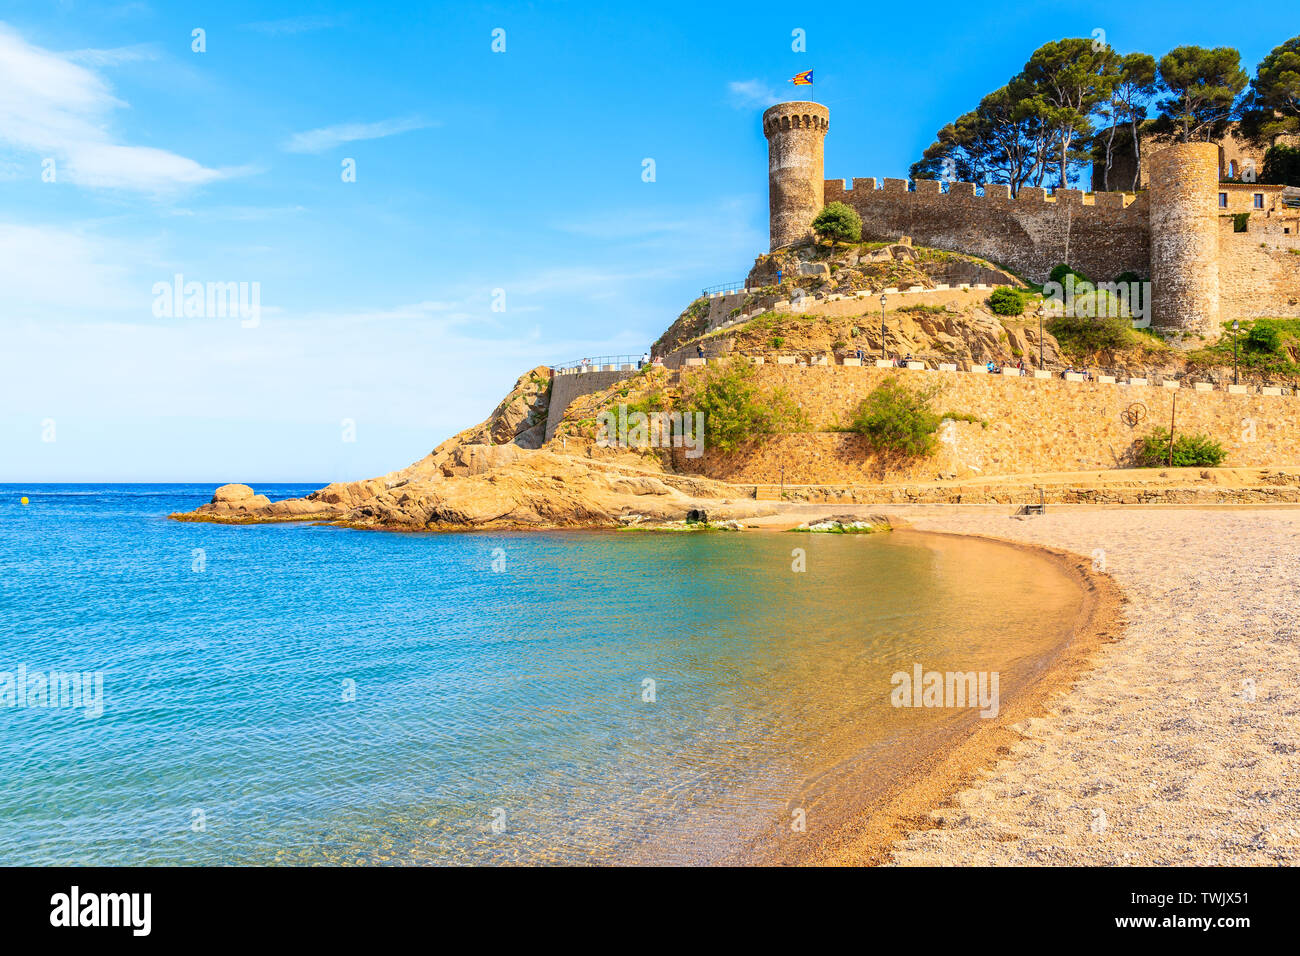 View of Tossa de Mar castle and beach at sunset time, Costa Brava, Spain Stock Photo